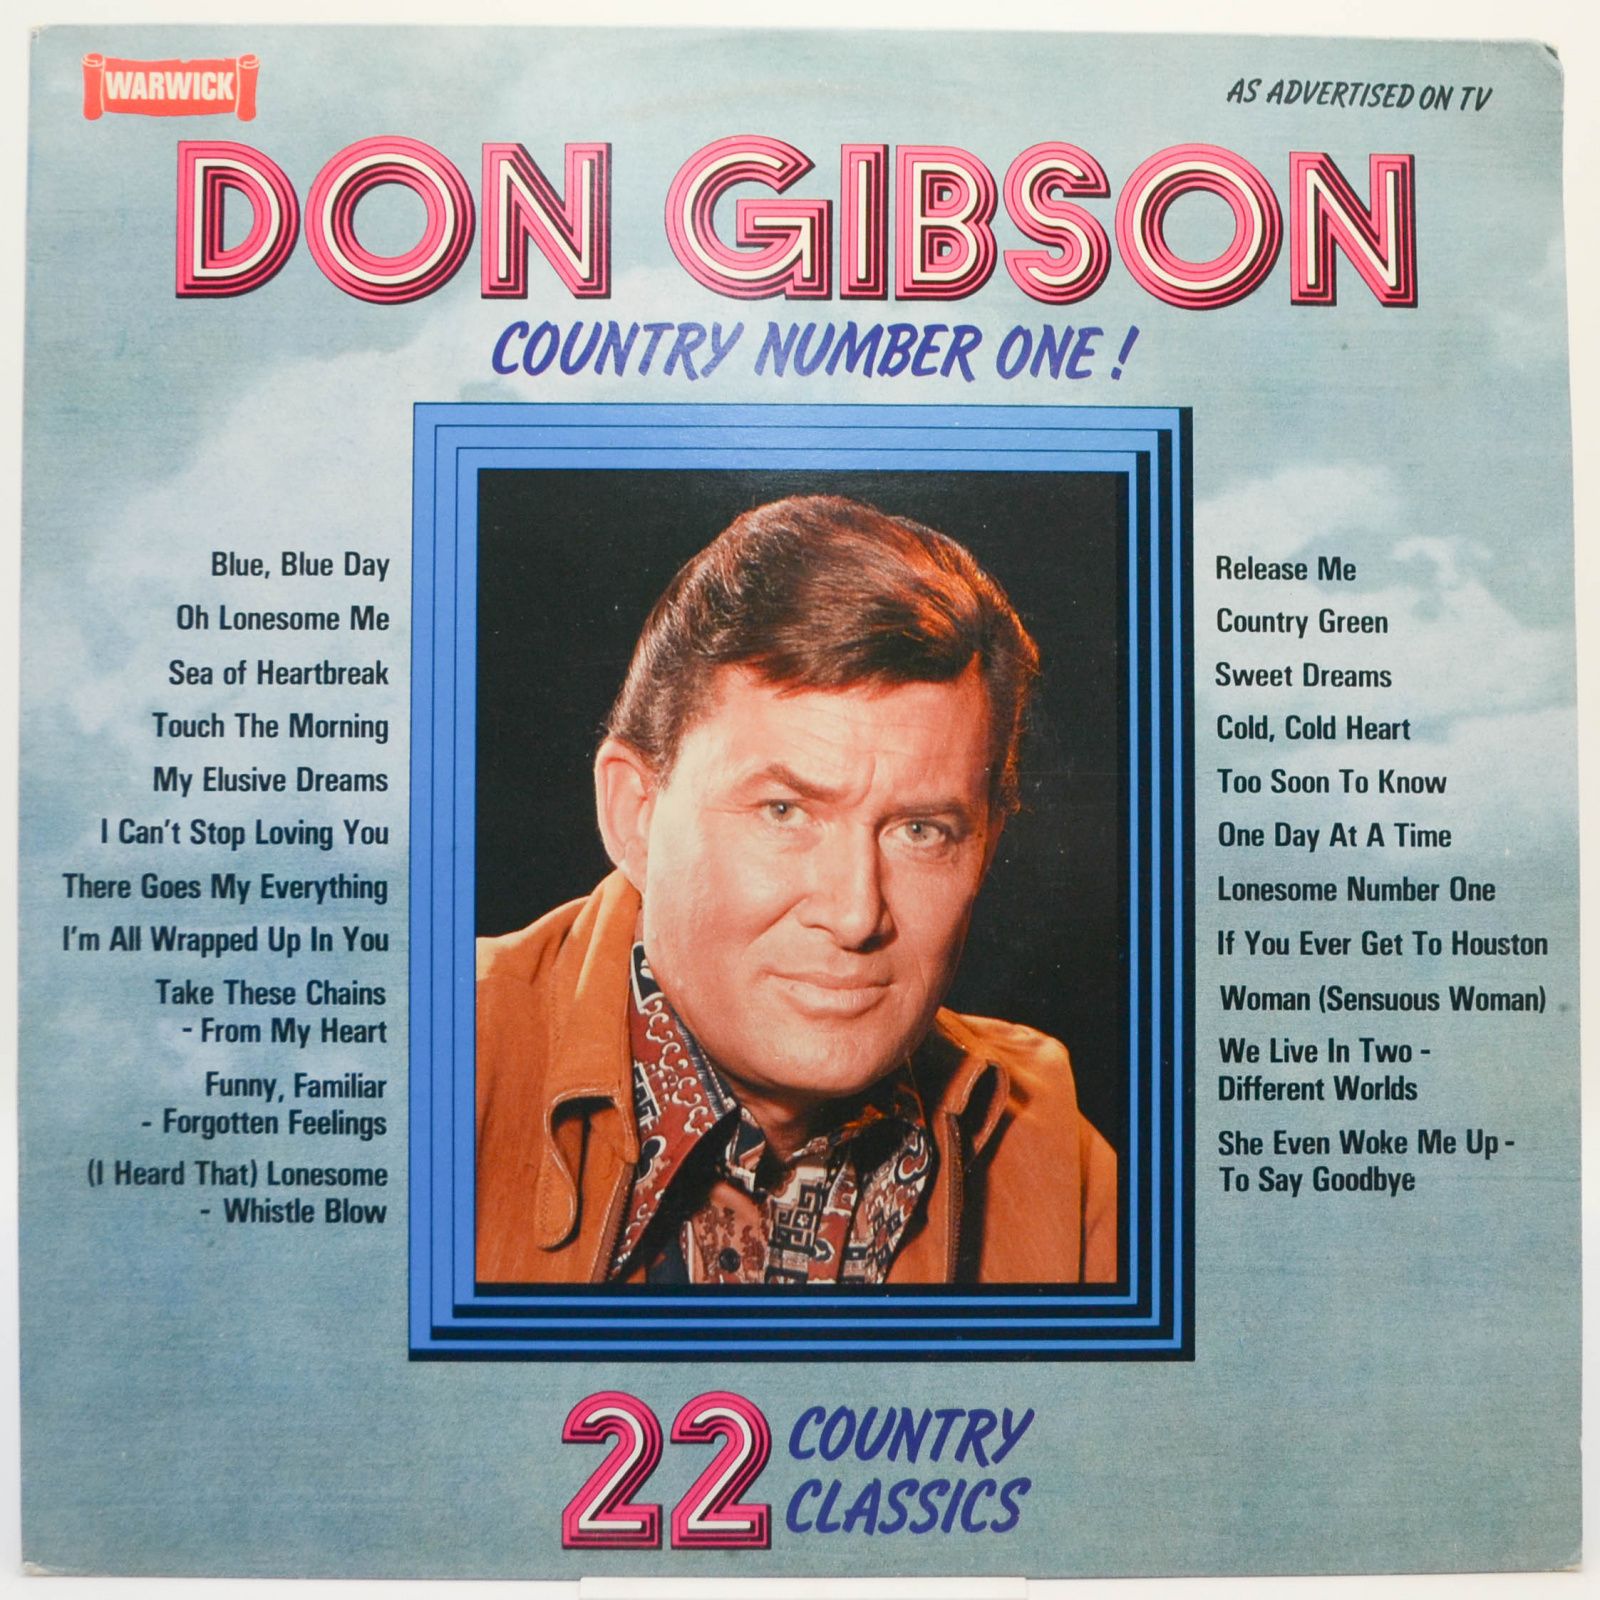 Country Number One ! (UK), 1980